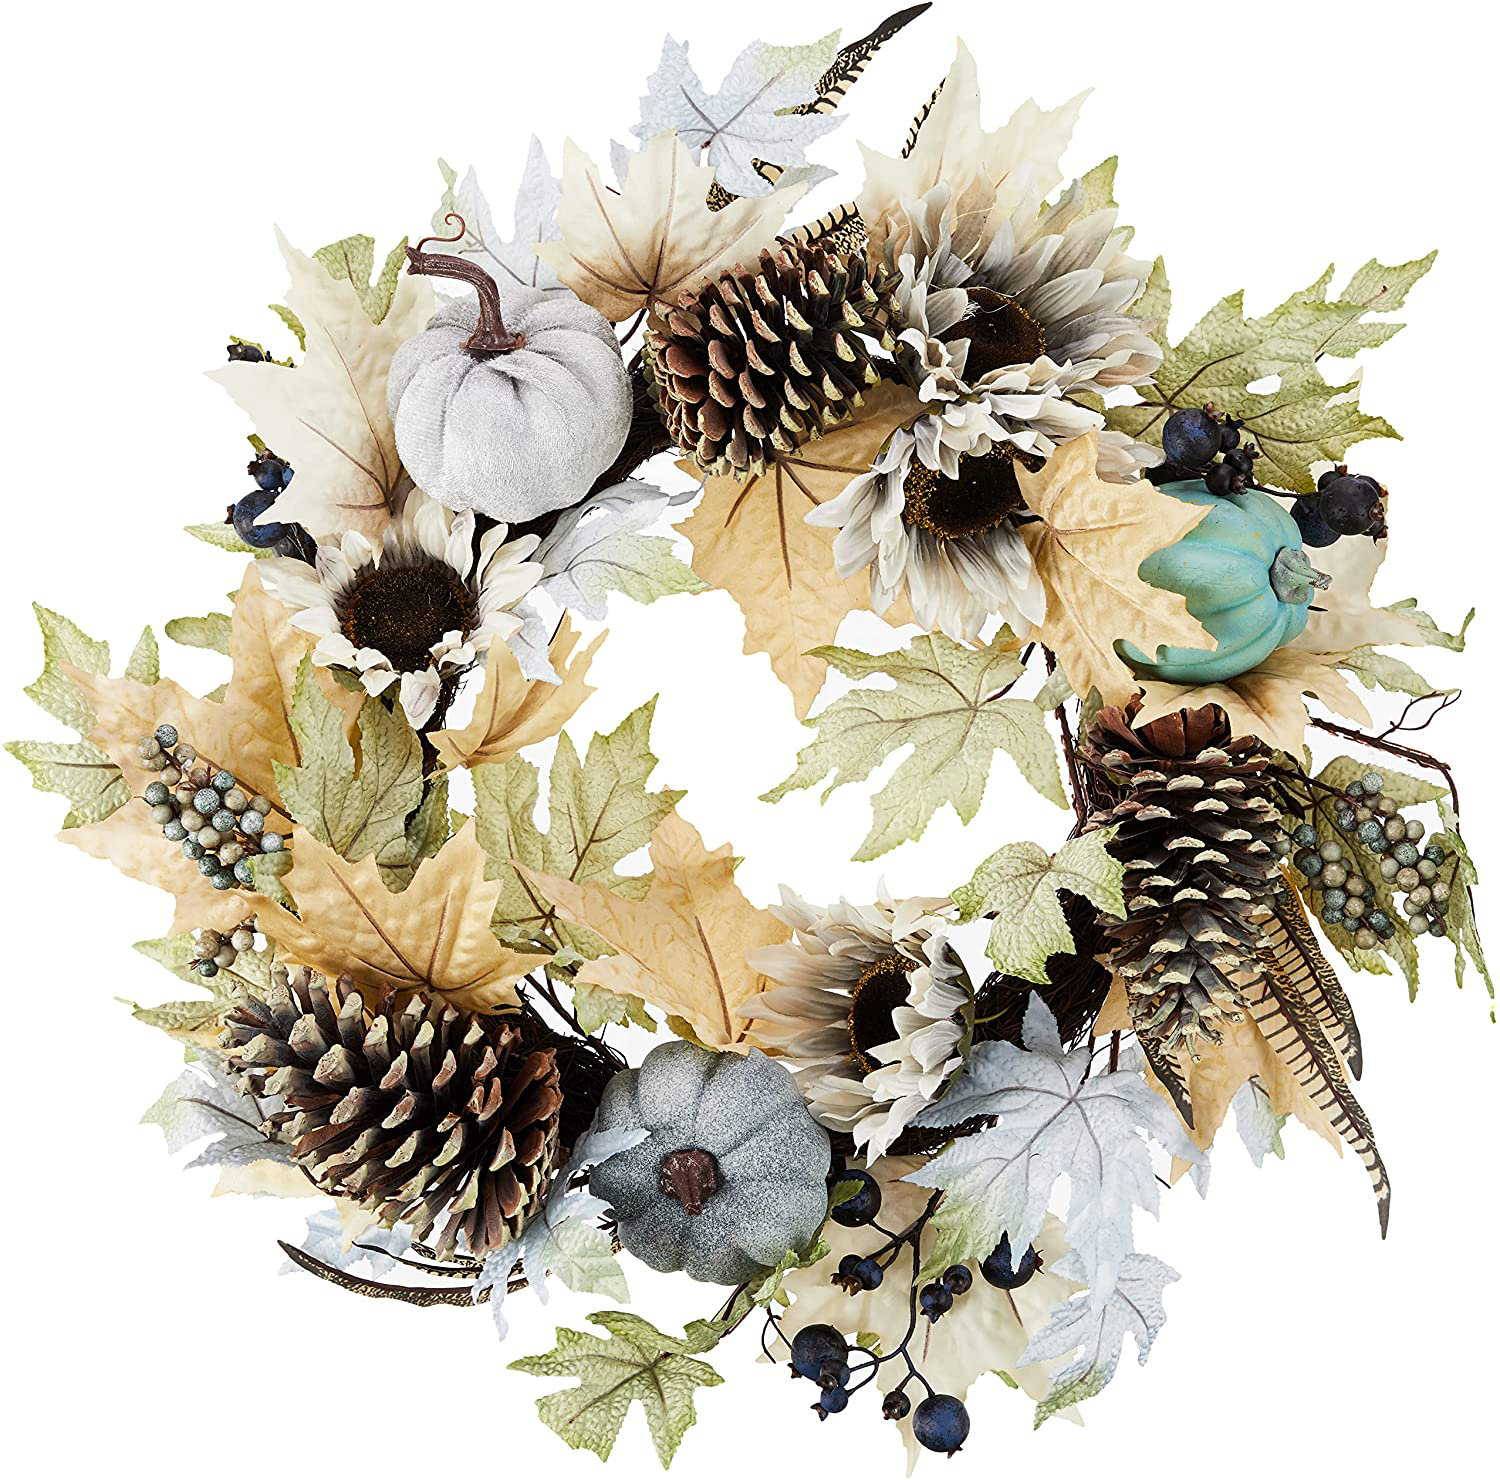 24 in. Artificial D Mixed Snow and Glitter Pine Indoor Wreath